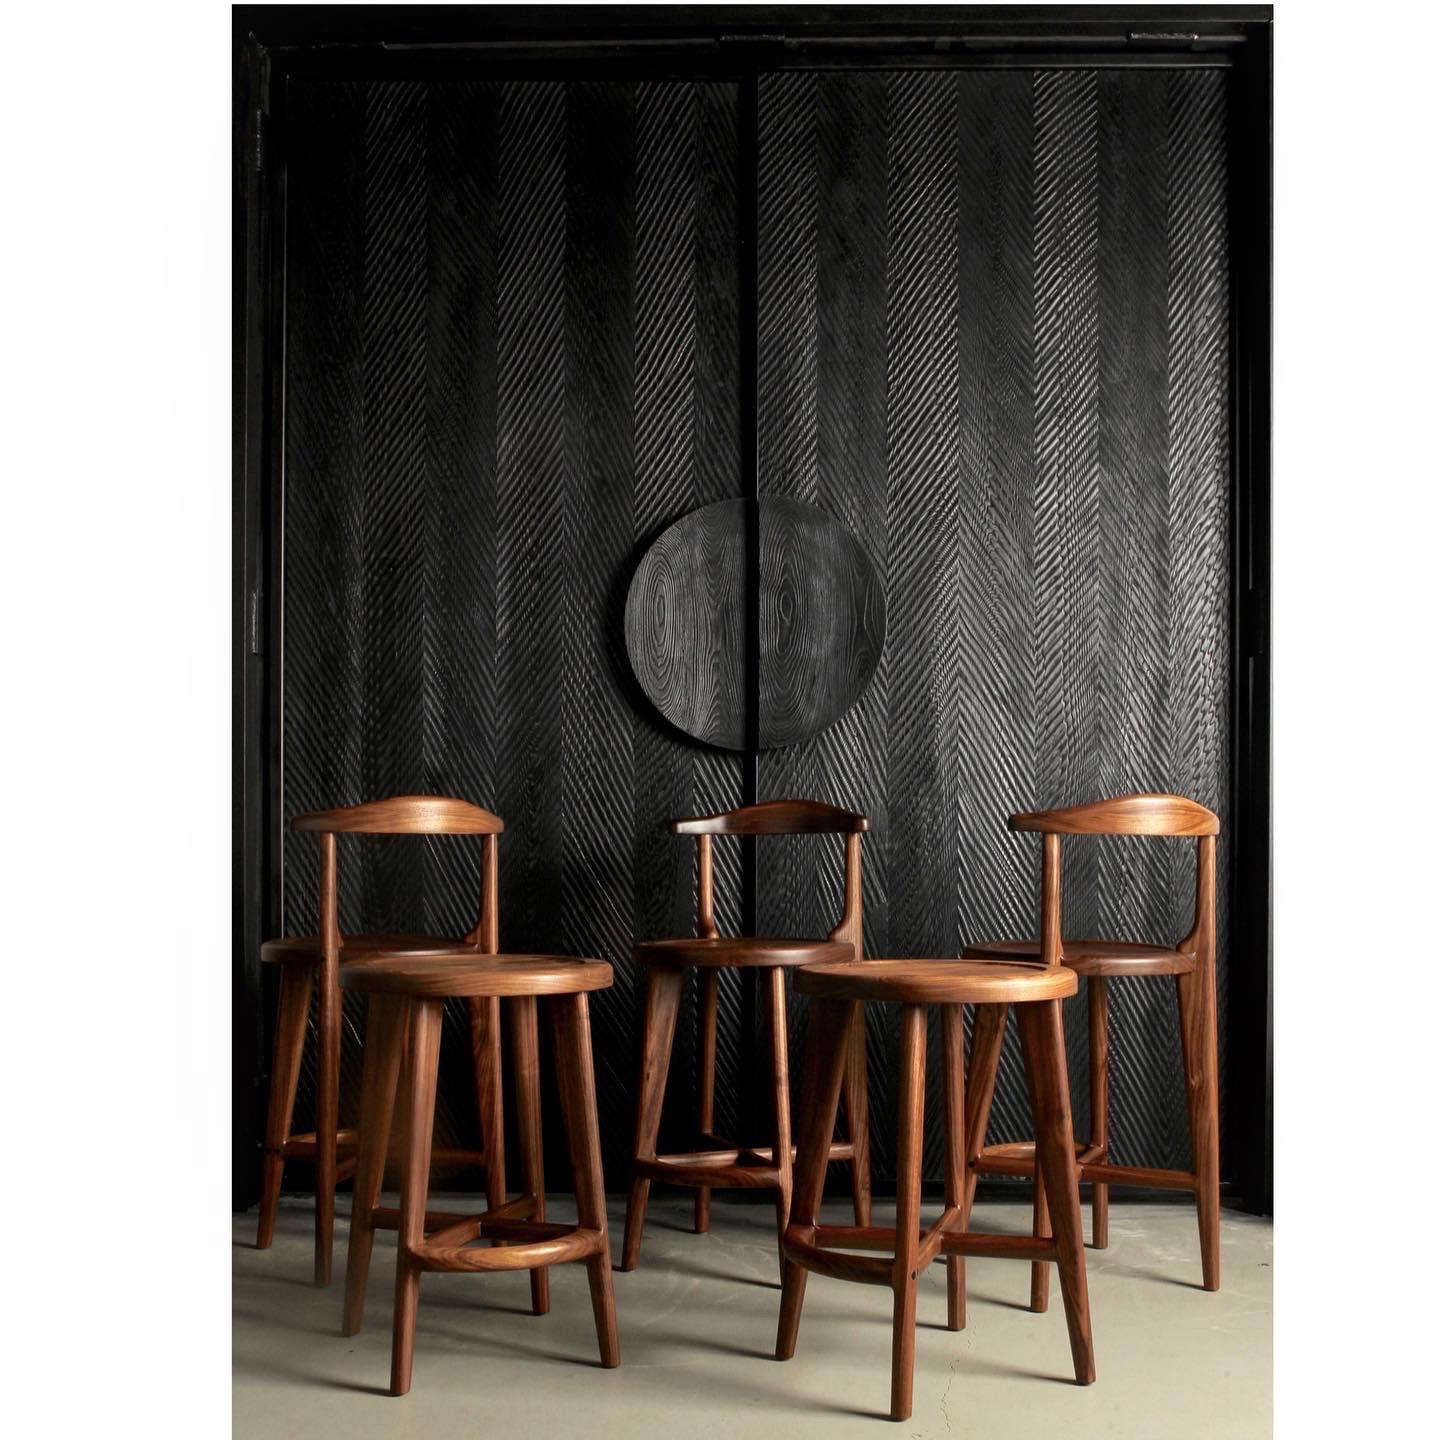 A Classic design that will beautifully suit any home interior. Crafted from solid American black walnut, wood is hand-selected for color uniformity and quality. Our bar stools feature generously sized seats, sculpted for comfort.

Joinery is